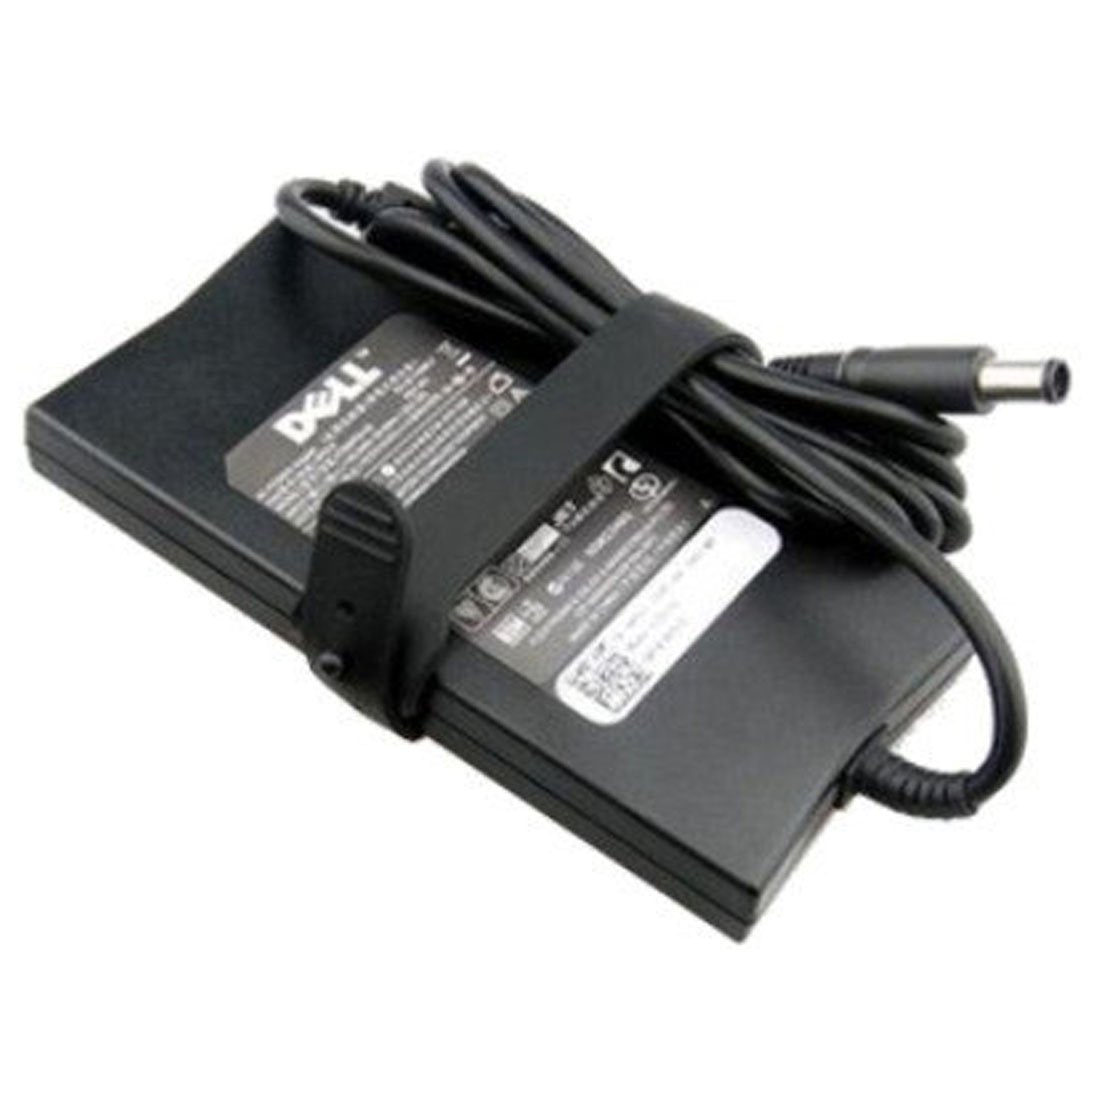 Dell Original 130W 19.5V 7.4mm Pin Laptop Charger Adapter for Inspiron 14 1464 With Power Cord